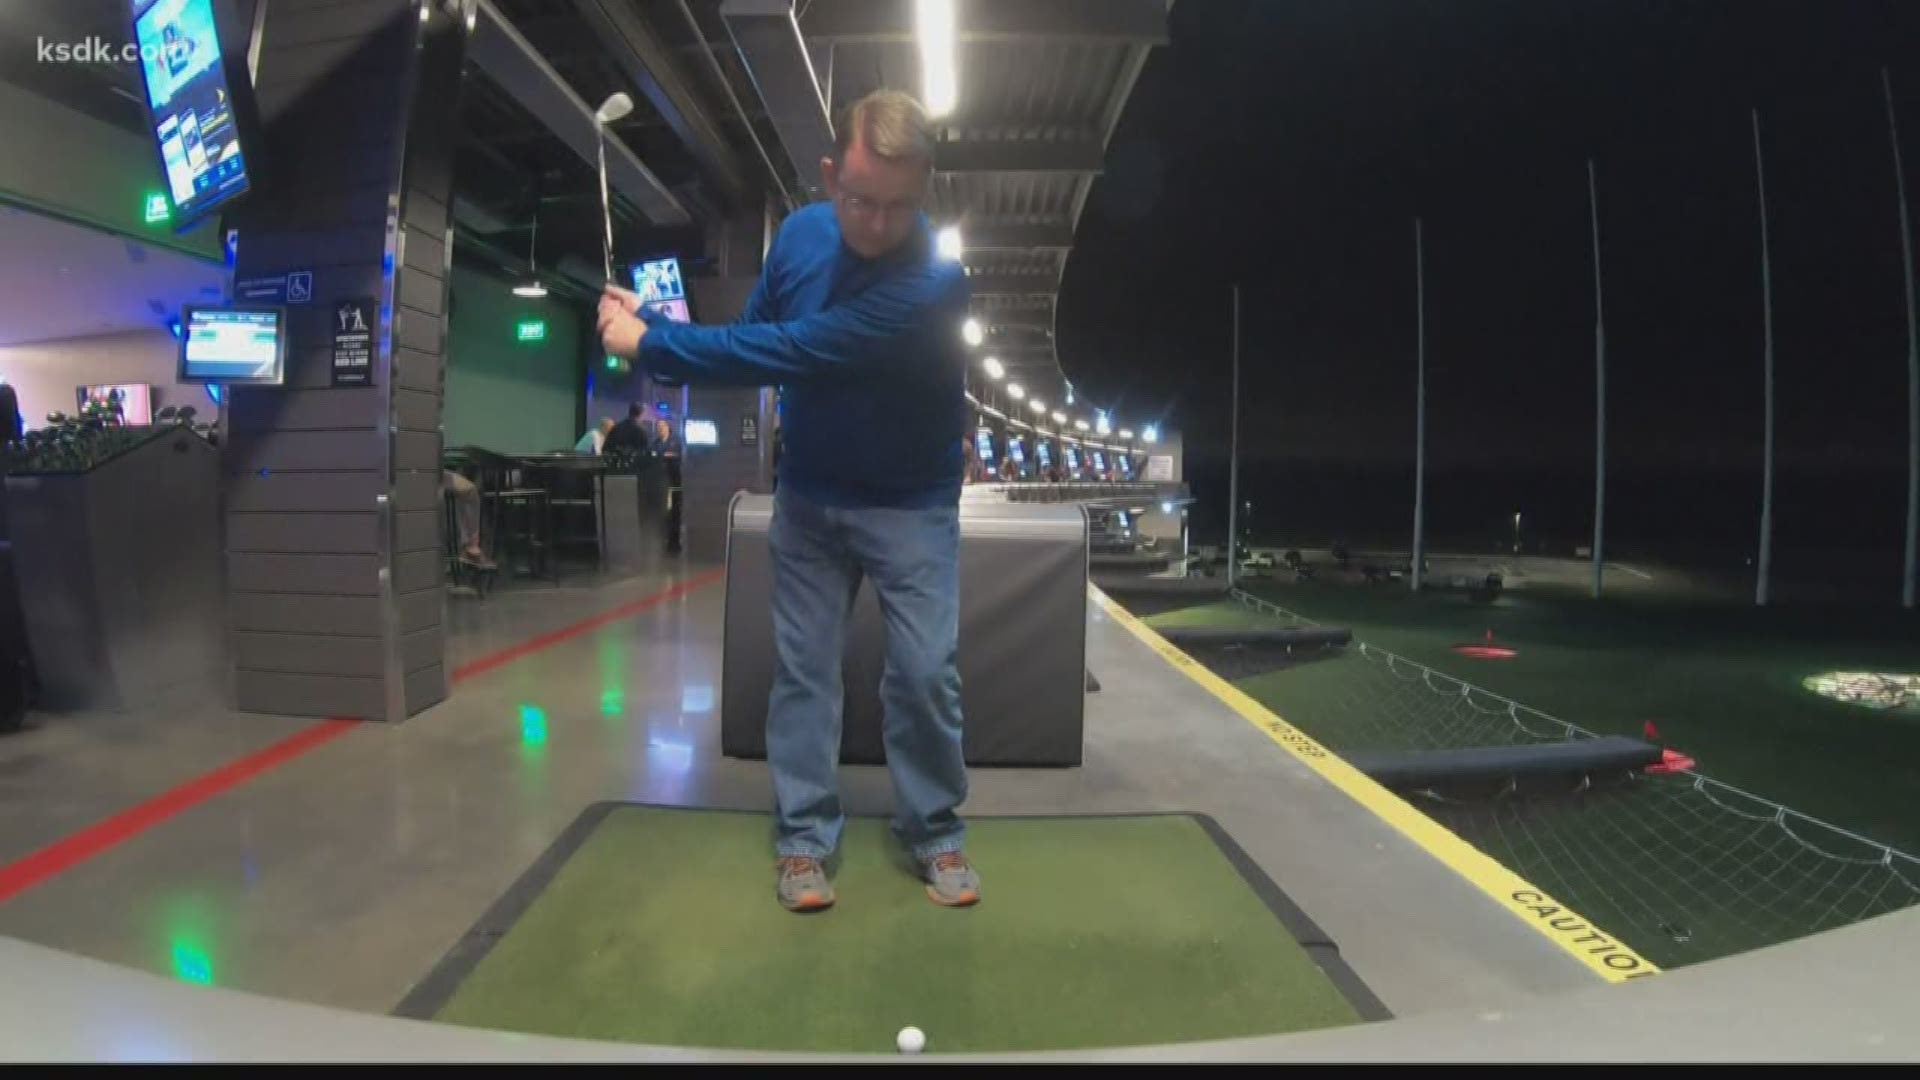 A spokesperson for Topgolf said the company is interested in bringing another location to the St. Louis area